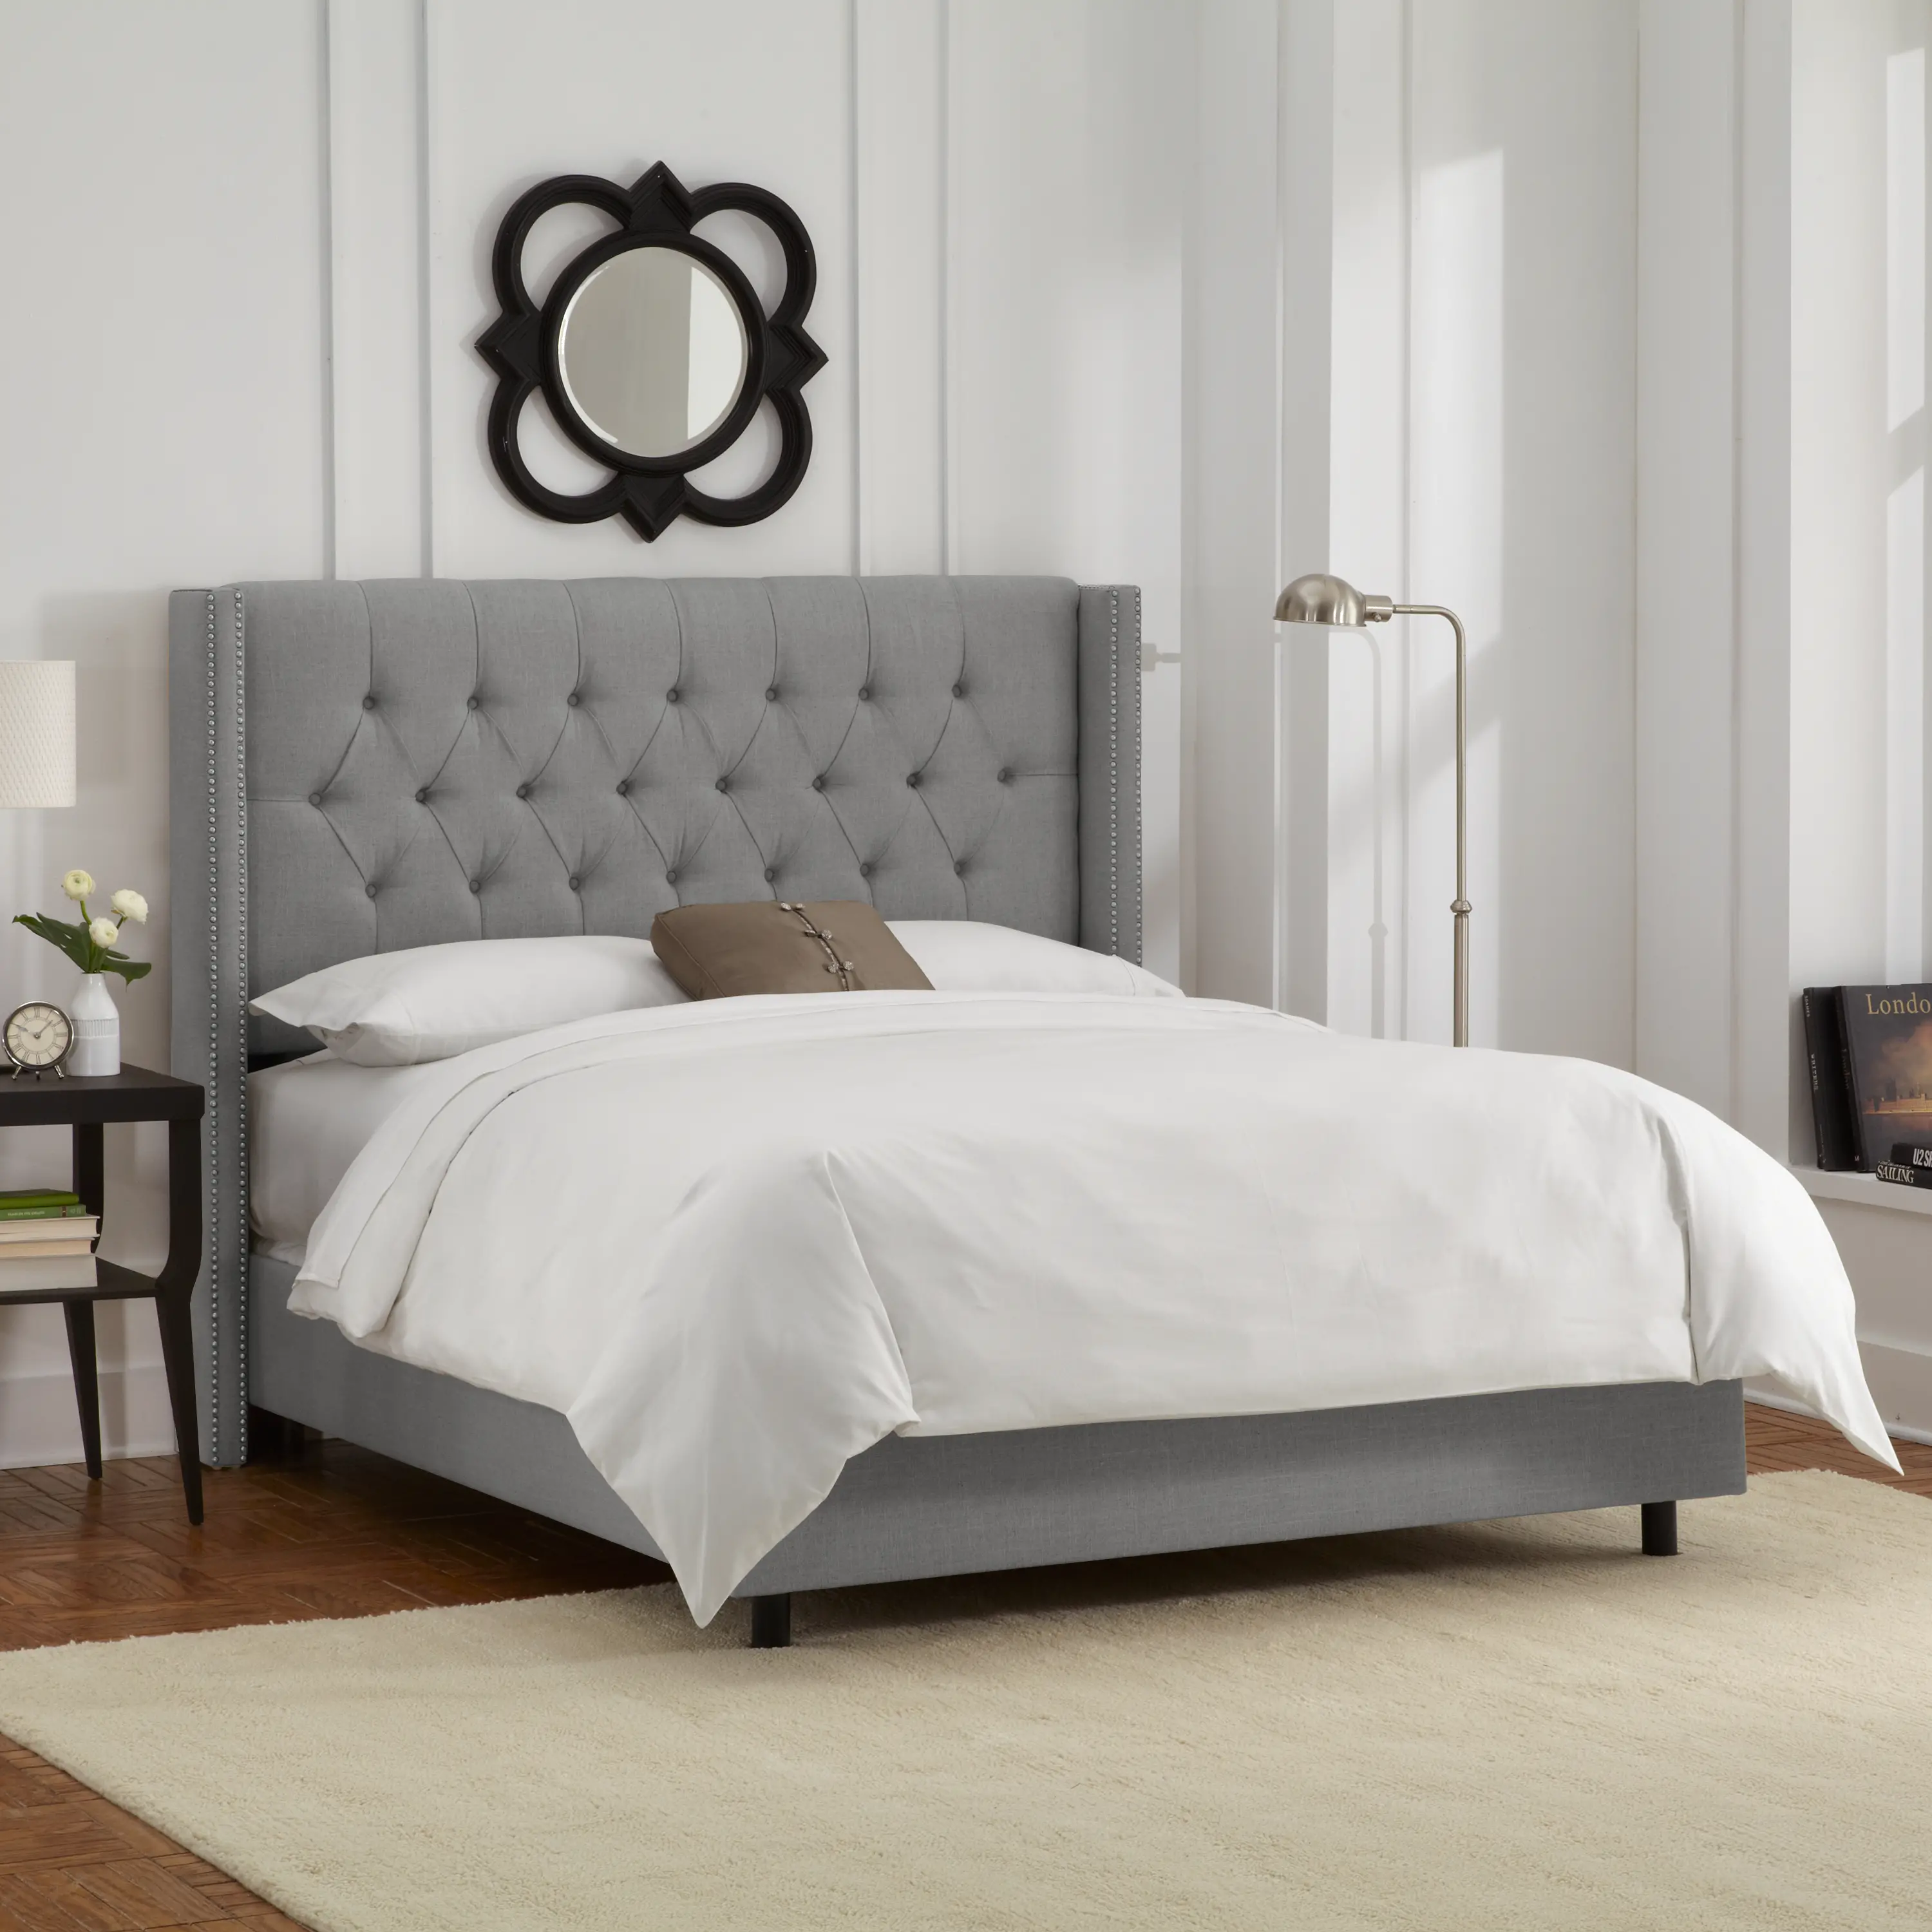 Abigail Gray Diamond Tufted Wingback Queen Bed - Skyline Furniture